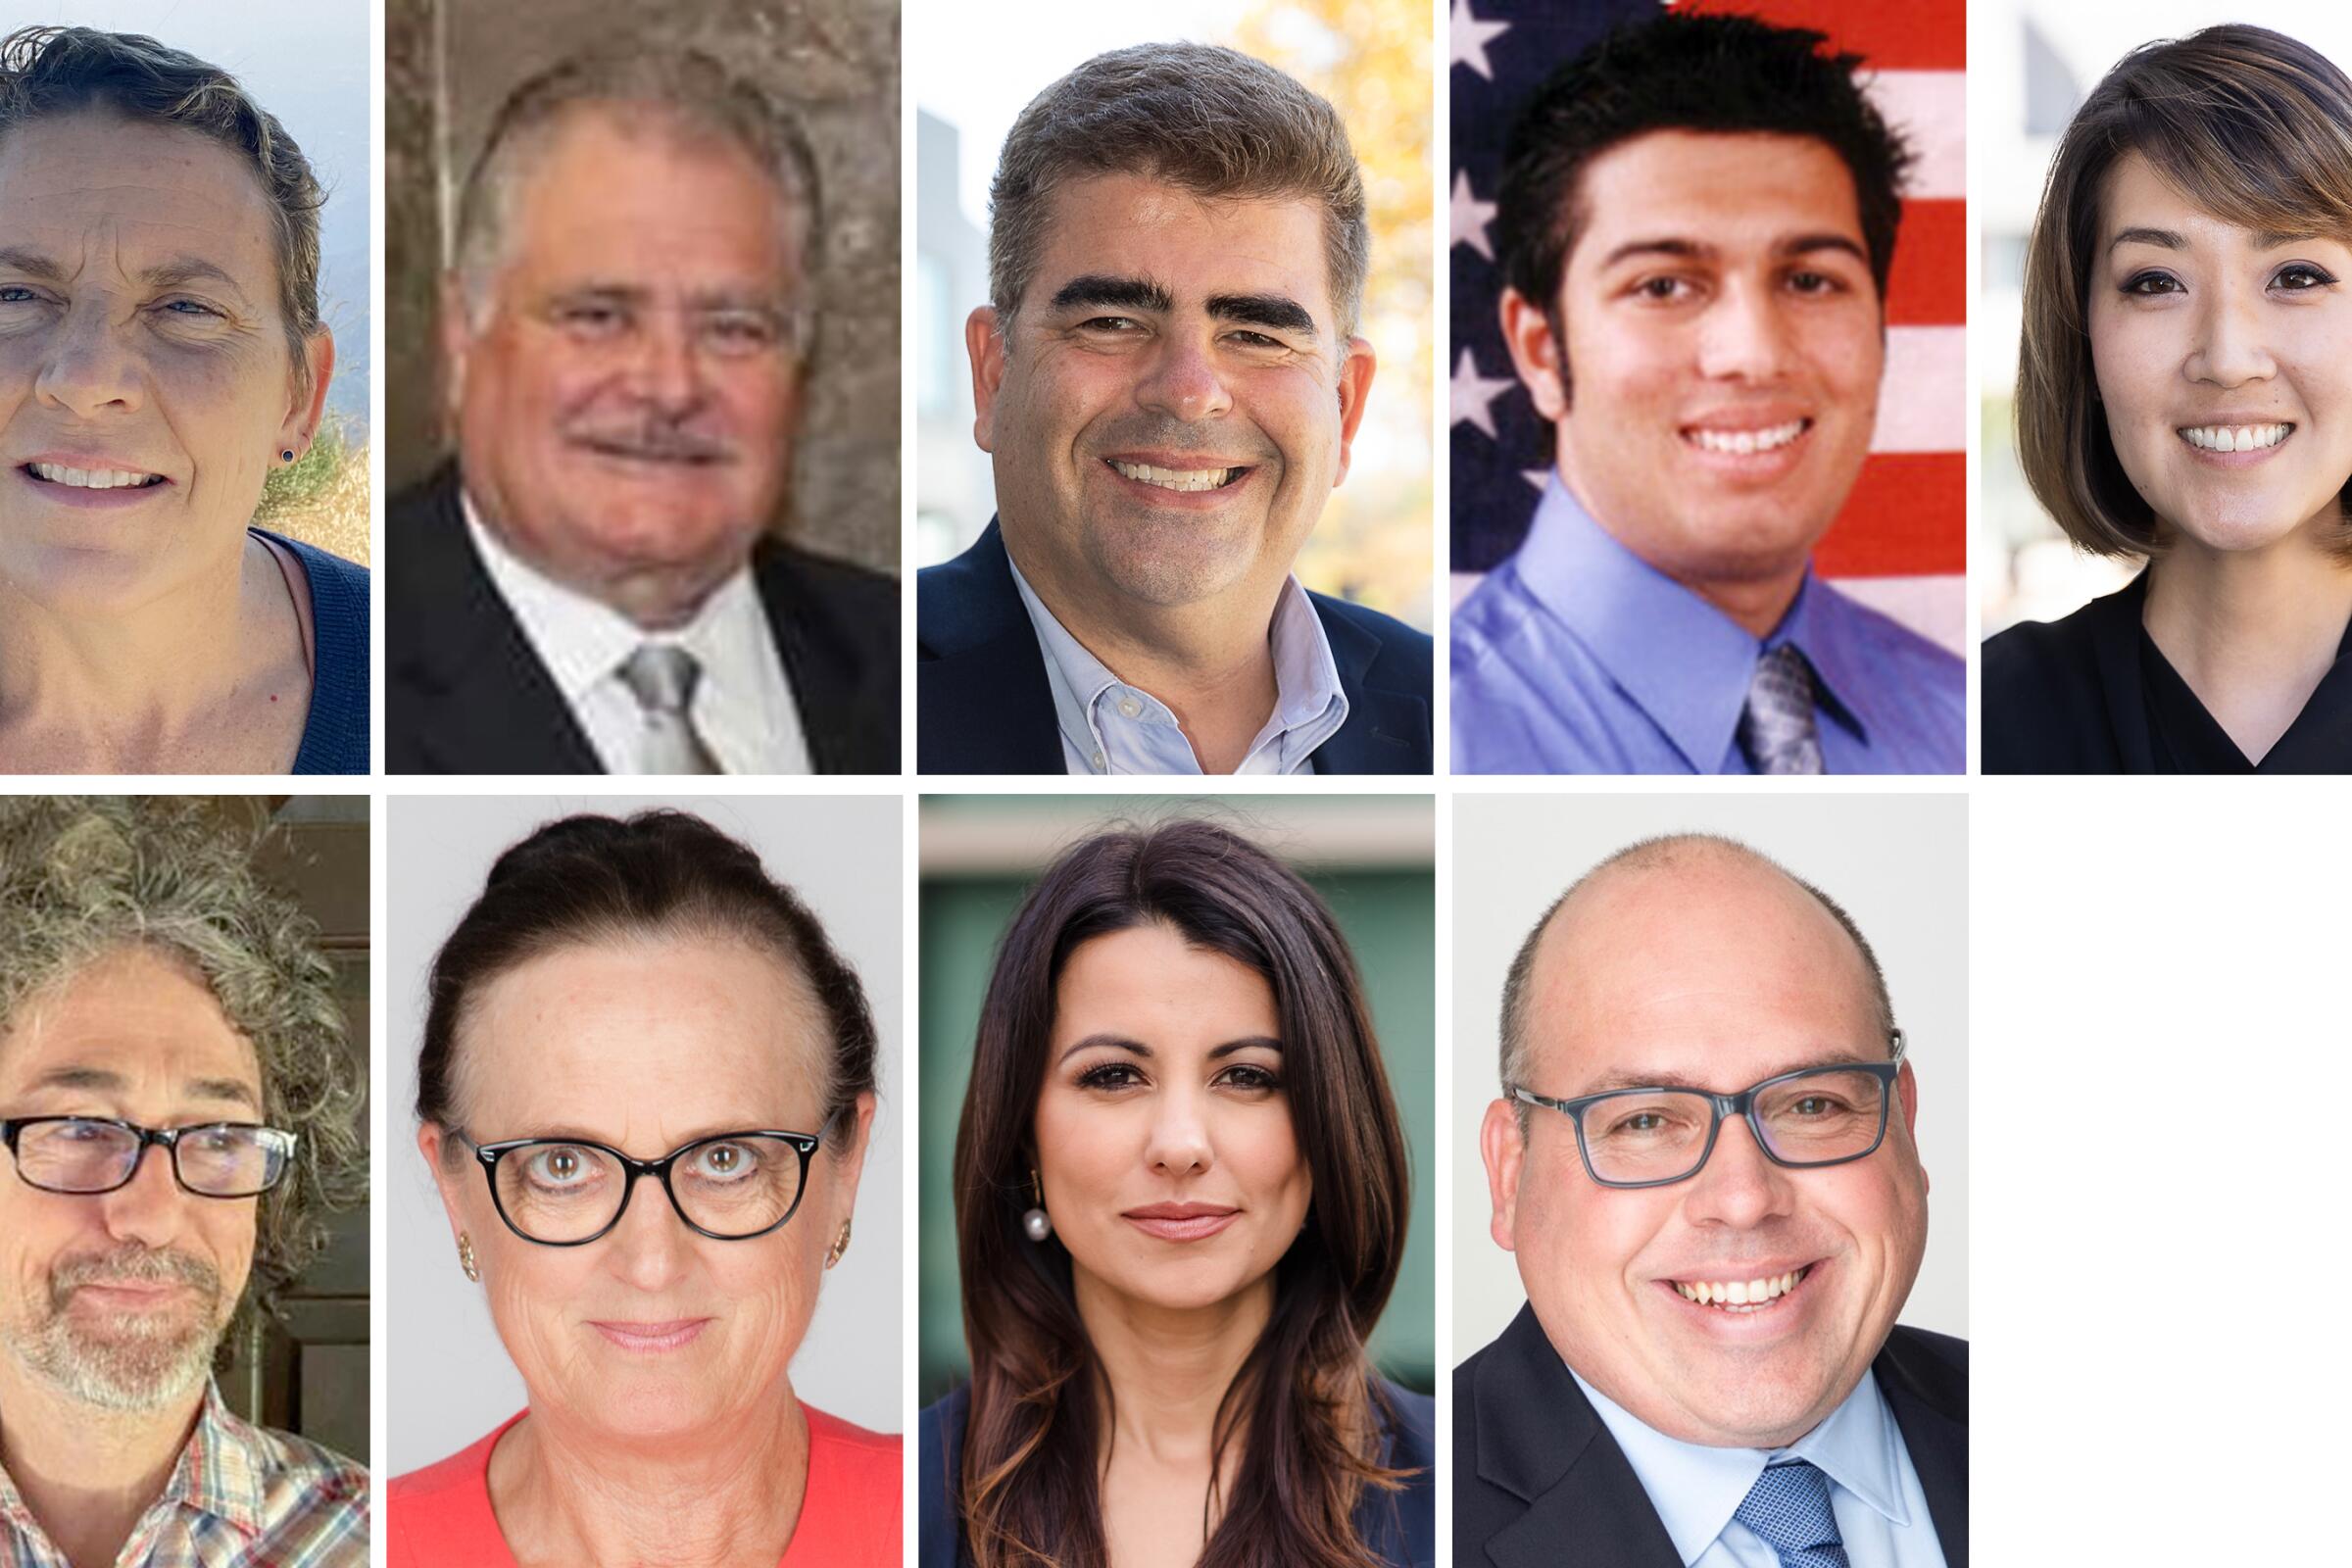 Headshot photos of nine candidates running for seats on the Los Angeles Community College Board of Trustees. 